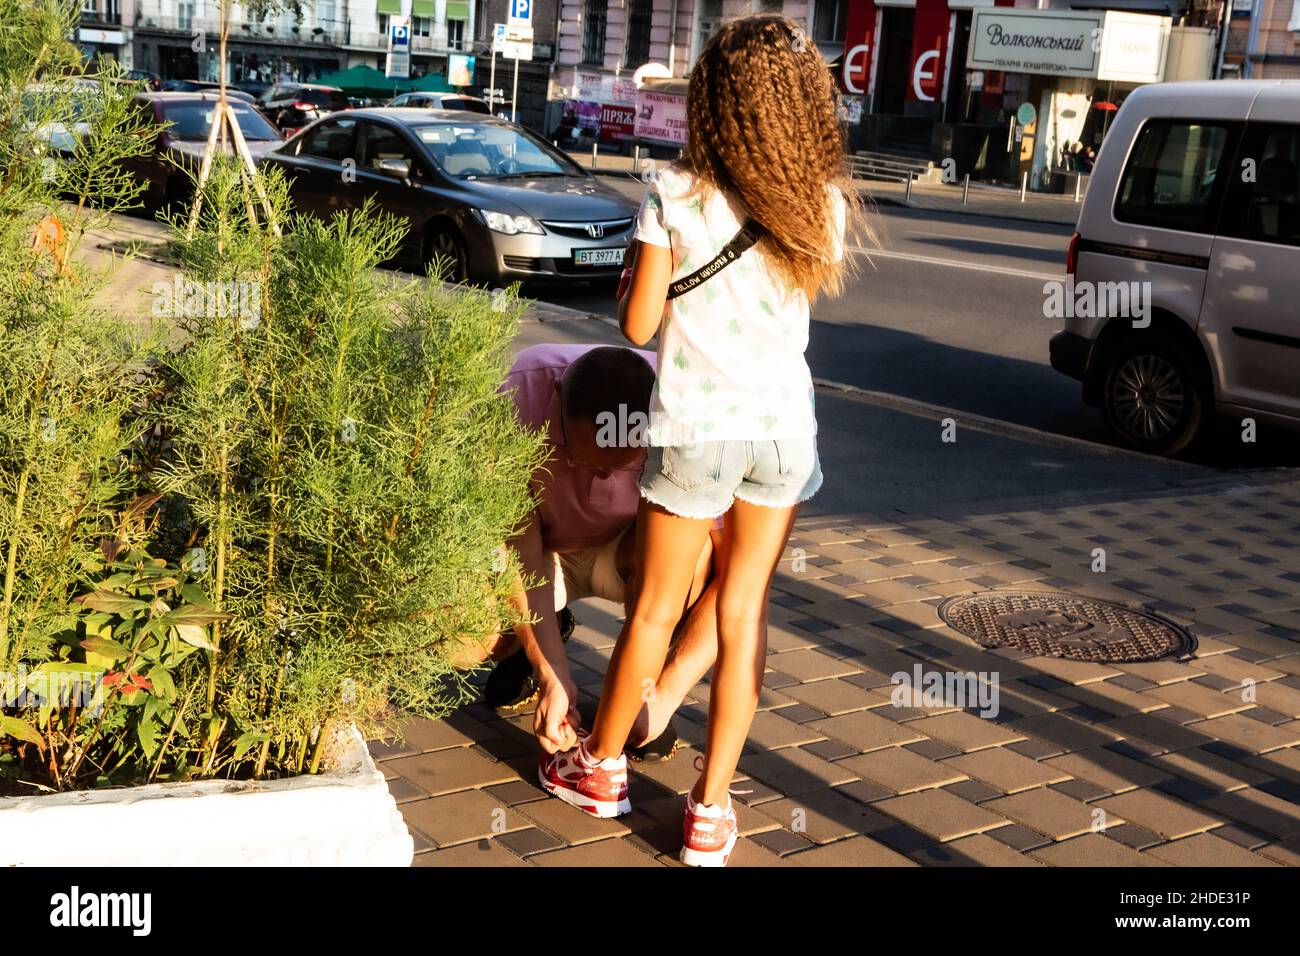 Dad helps daughter to tie laces on her sneakers on sunny summer day on a street in Kiev. Girl accepts help with marvellous stillness and royal grace. Stock Photo